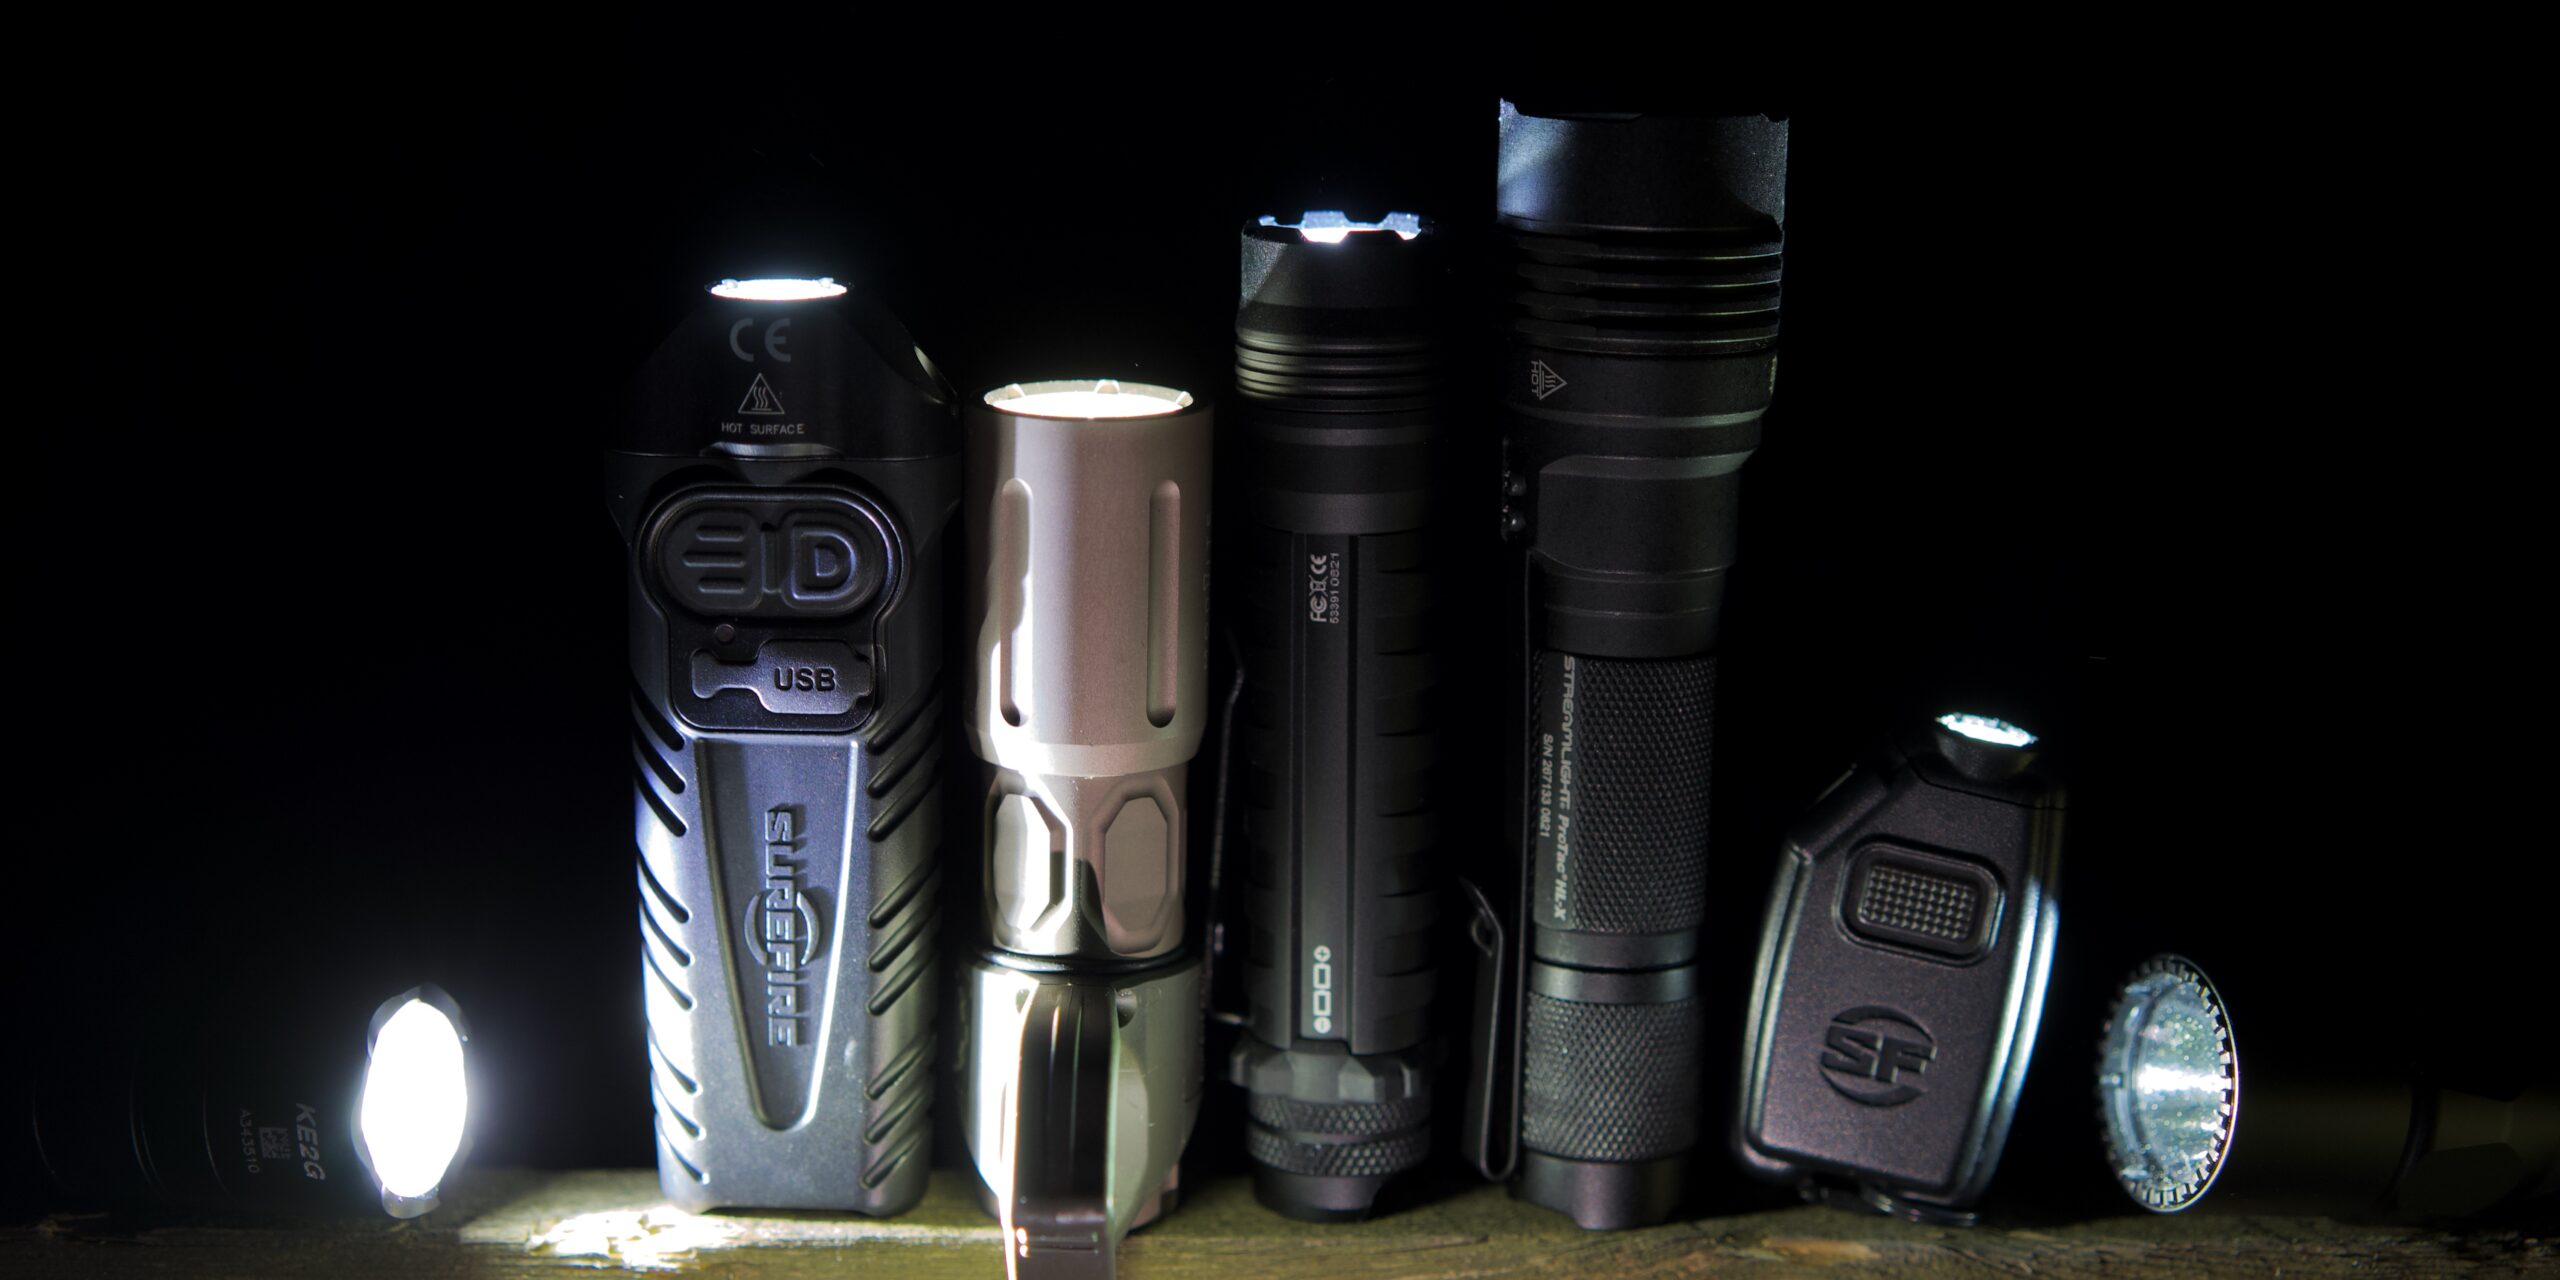 The best flashlights lined up in a row